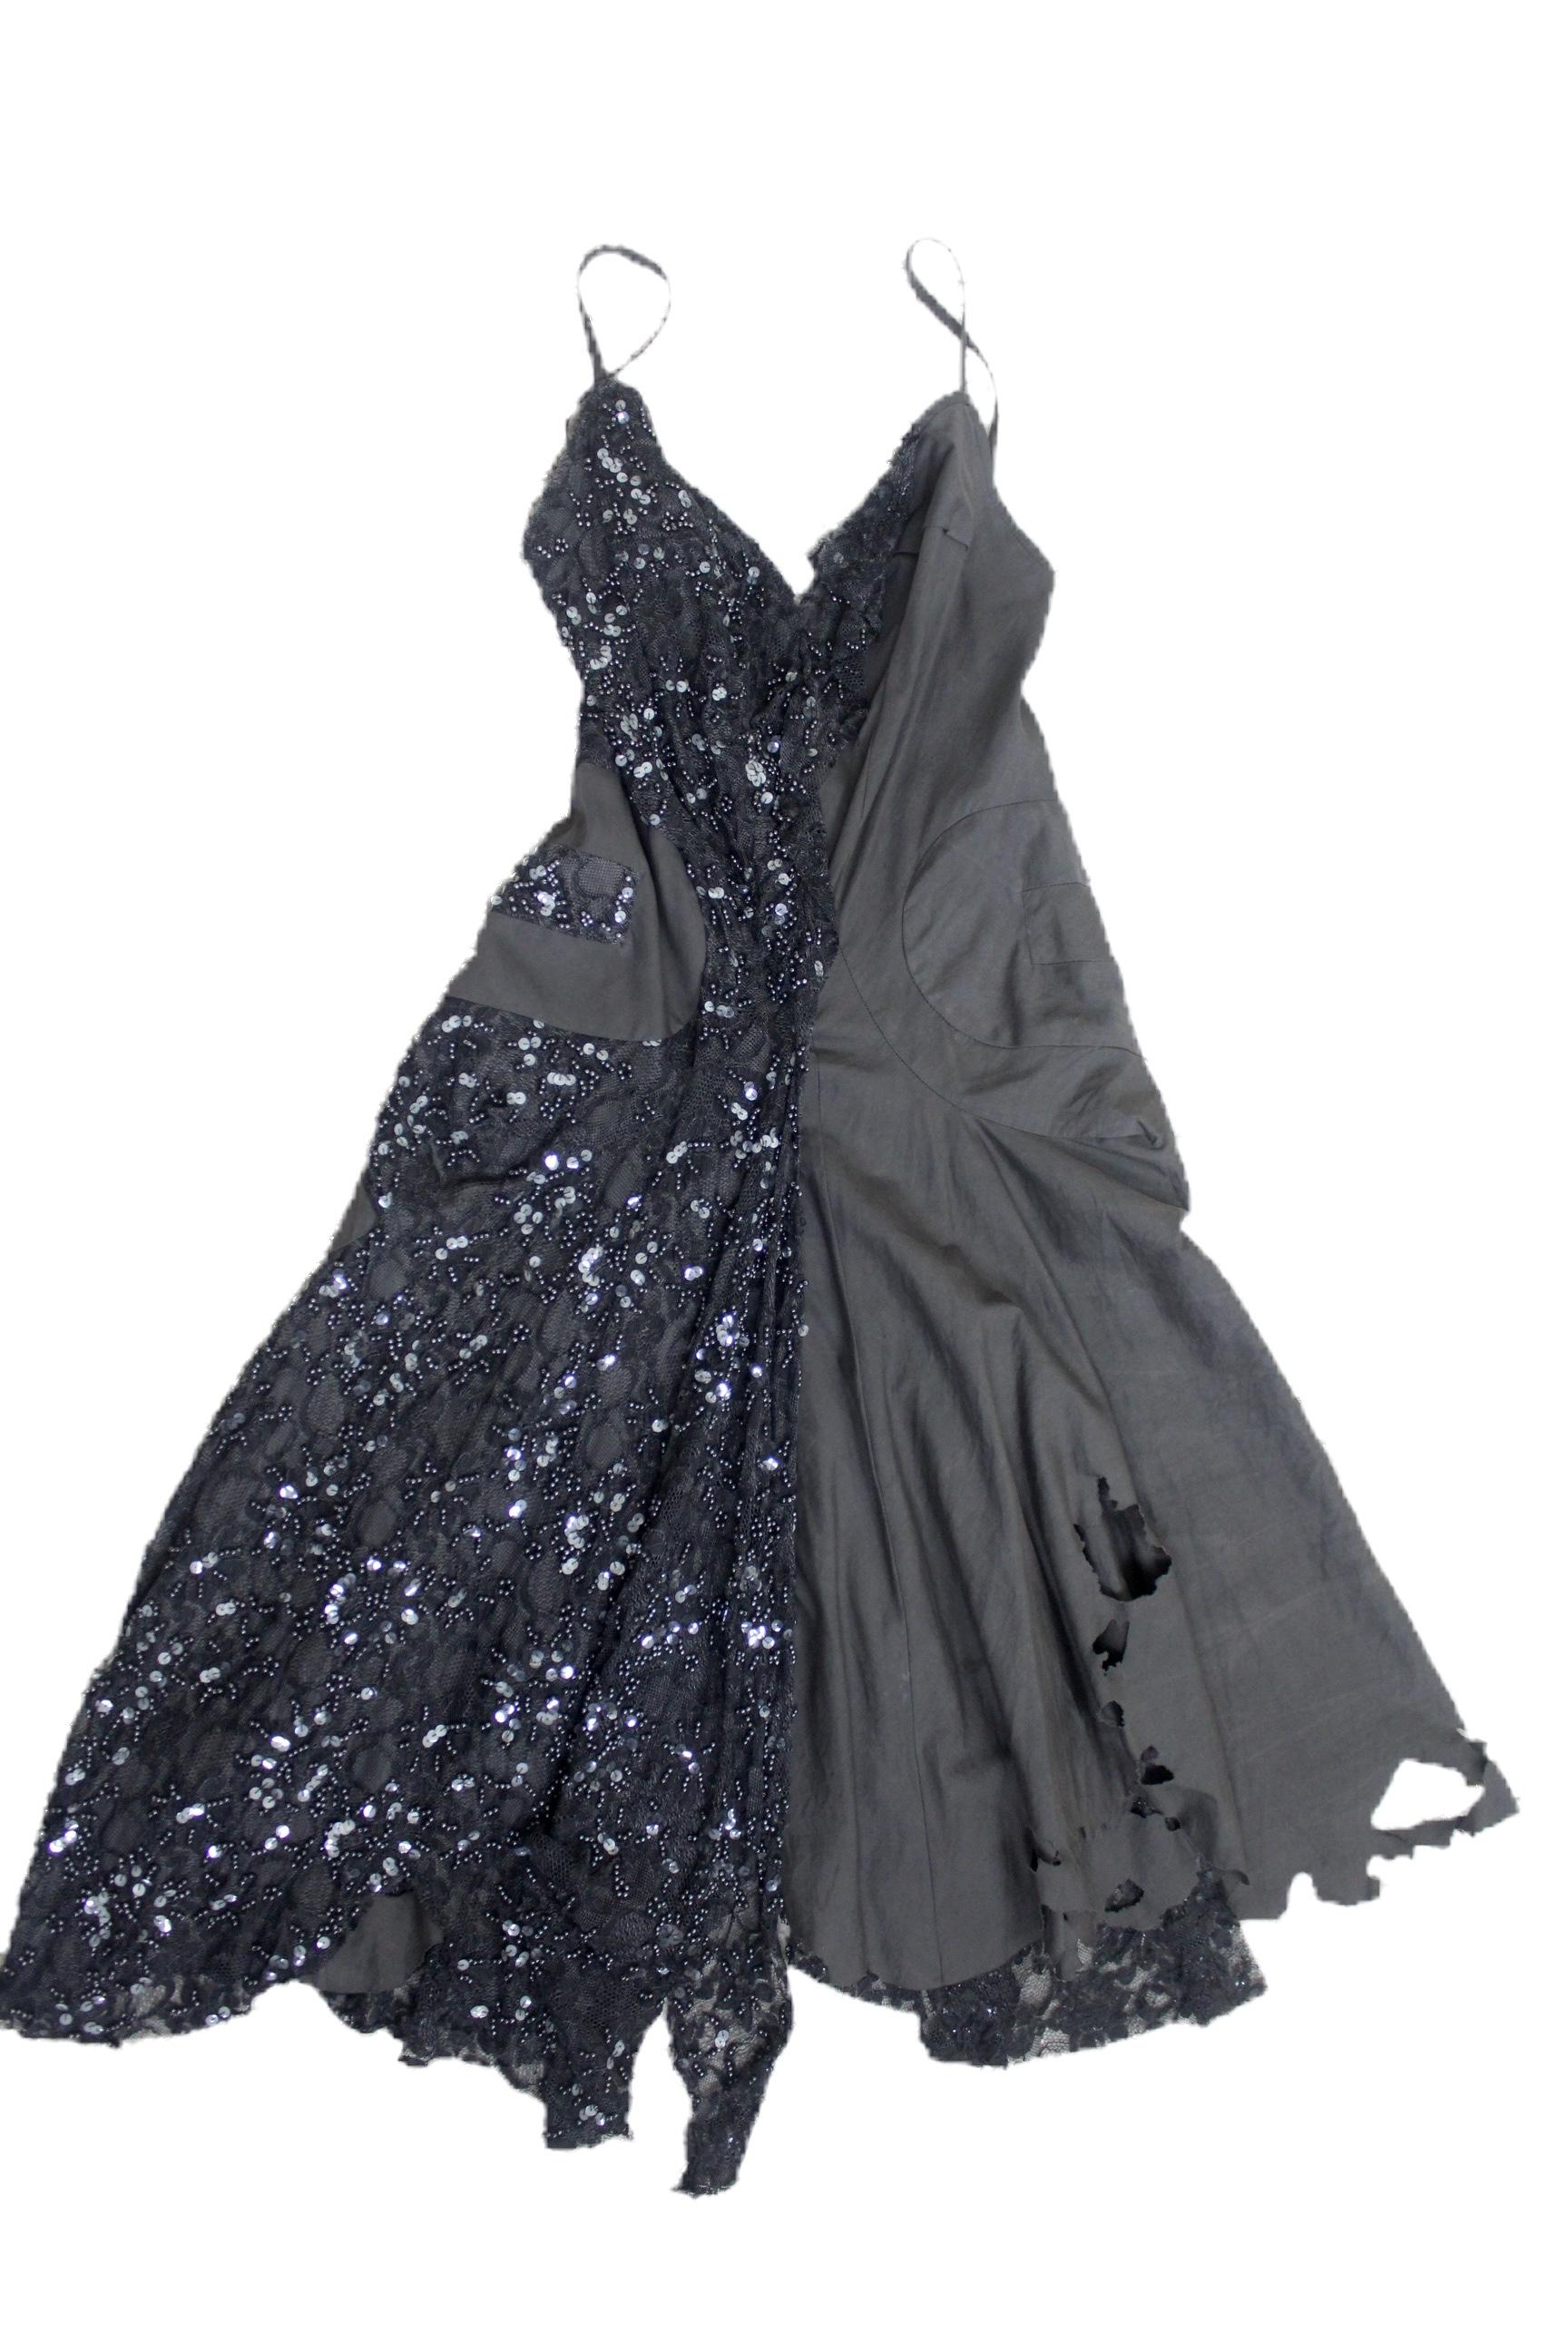 Junya Watanabe Comme des Garcons 2002 Collection Beaded Runway Dress In Good Condition For Sale In Bath, GB